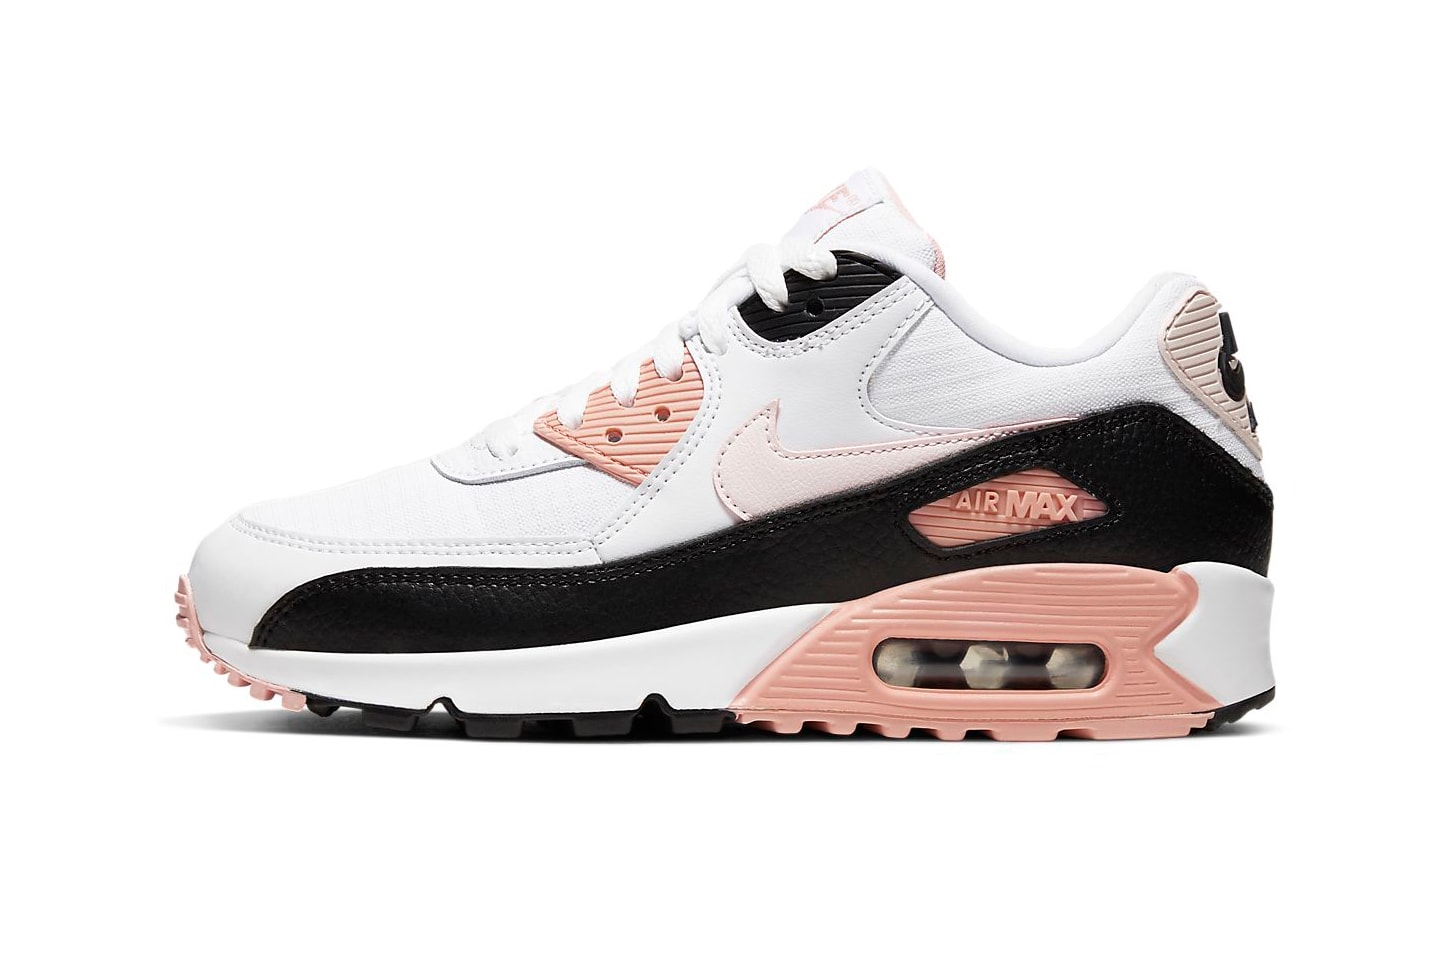 Nike Air Max 90 Monochrome Light Soft Pink Coral Stardust Black White Sneakers Trainers Women's